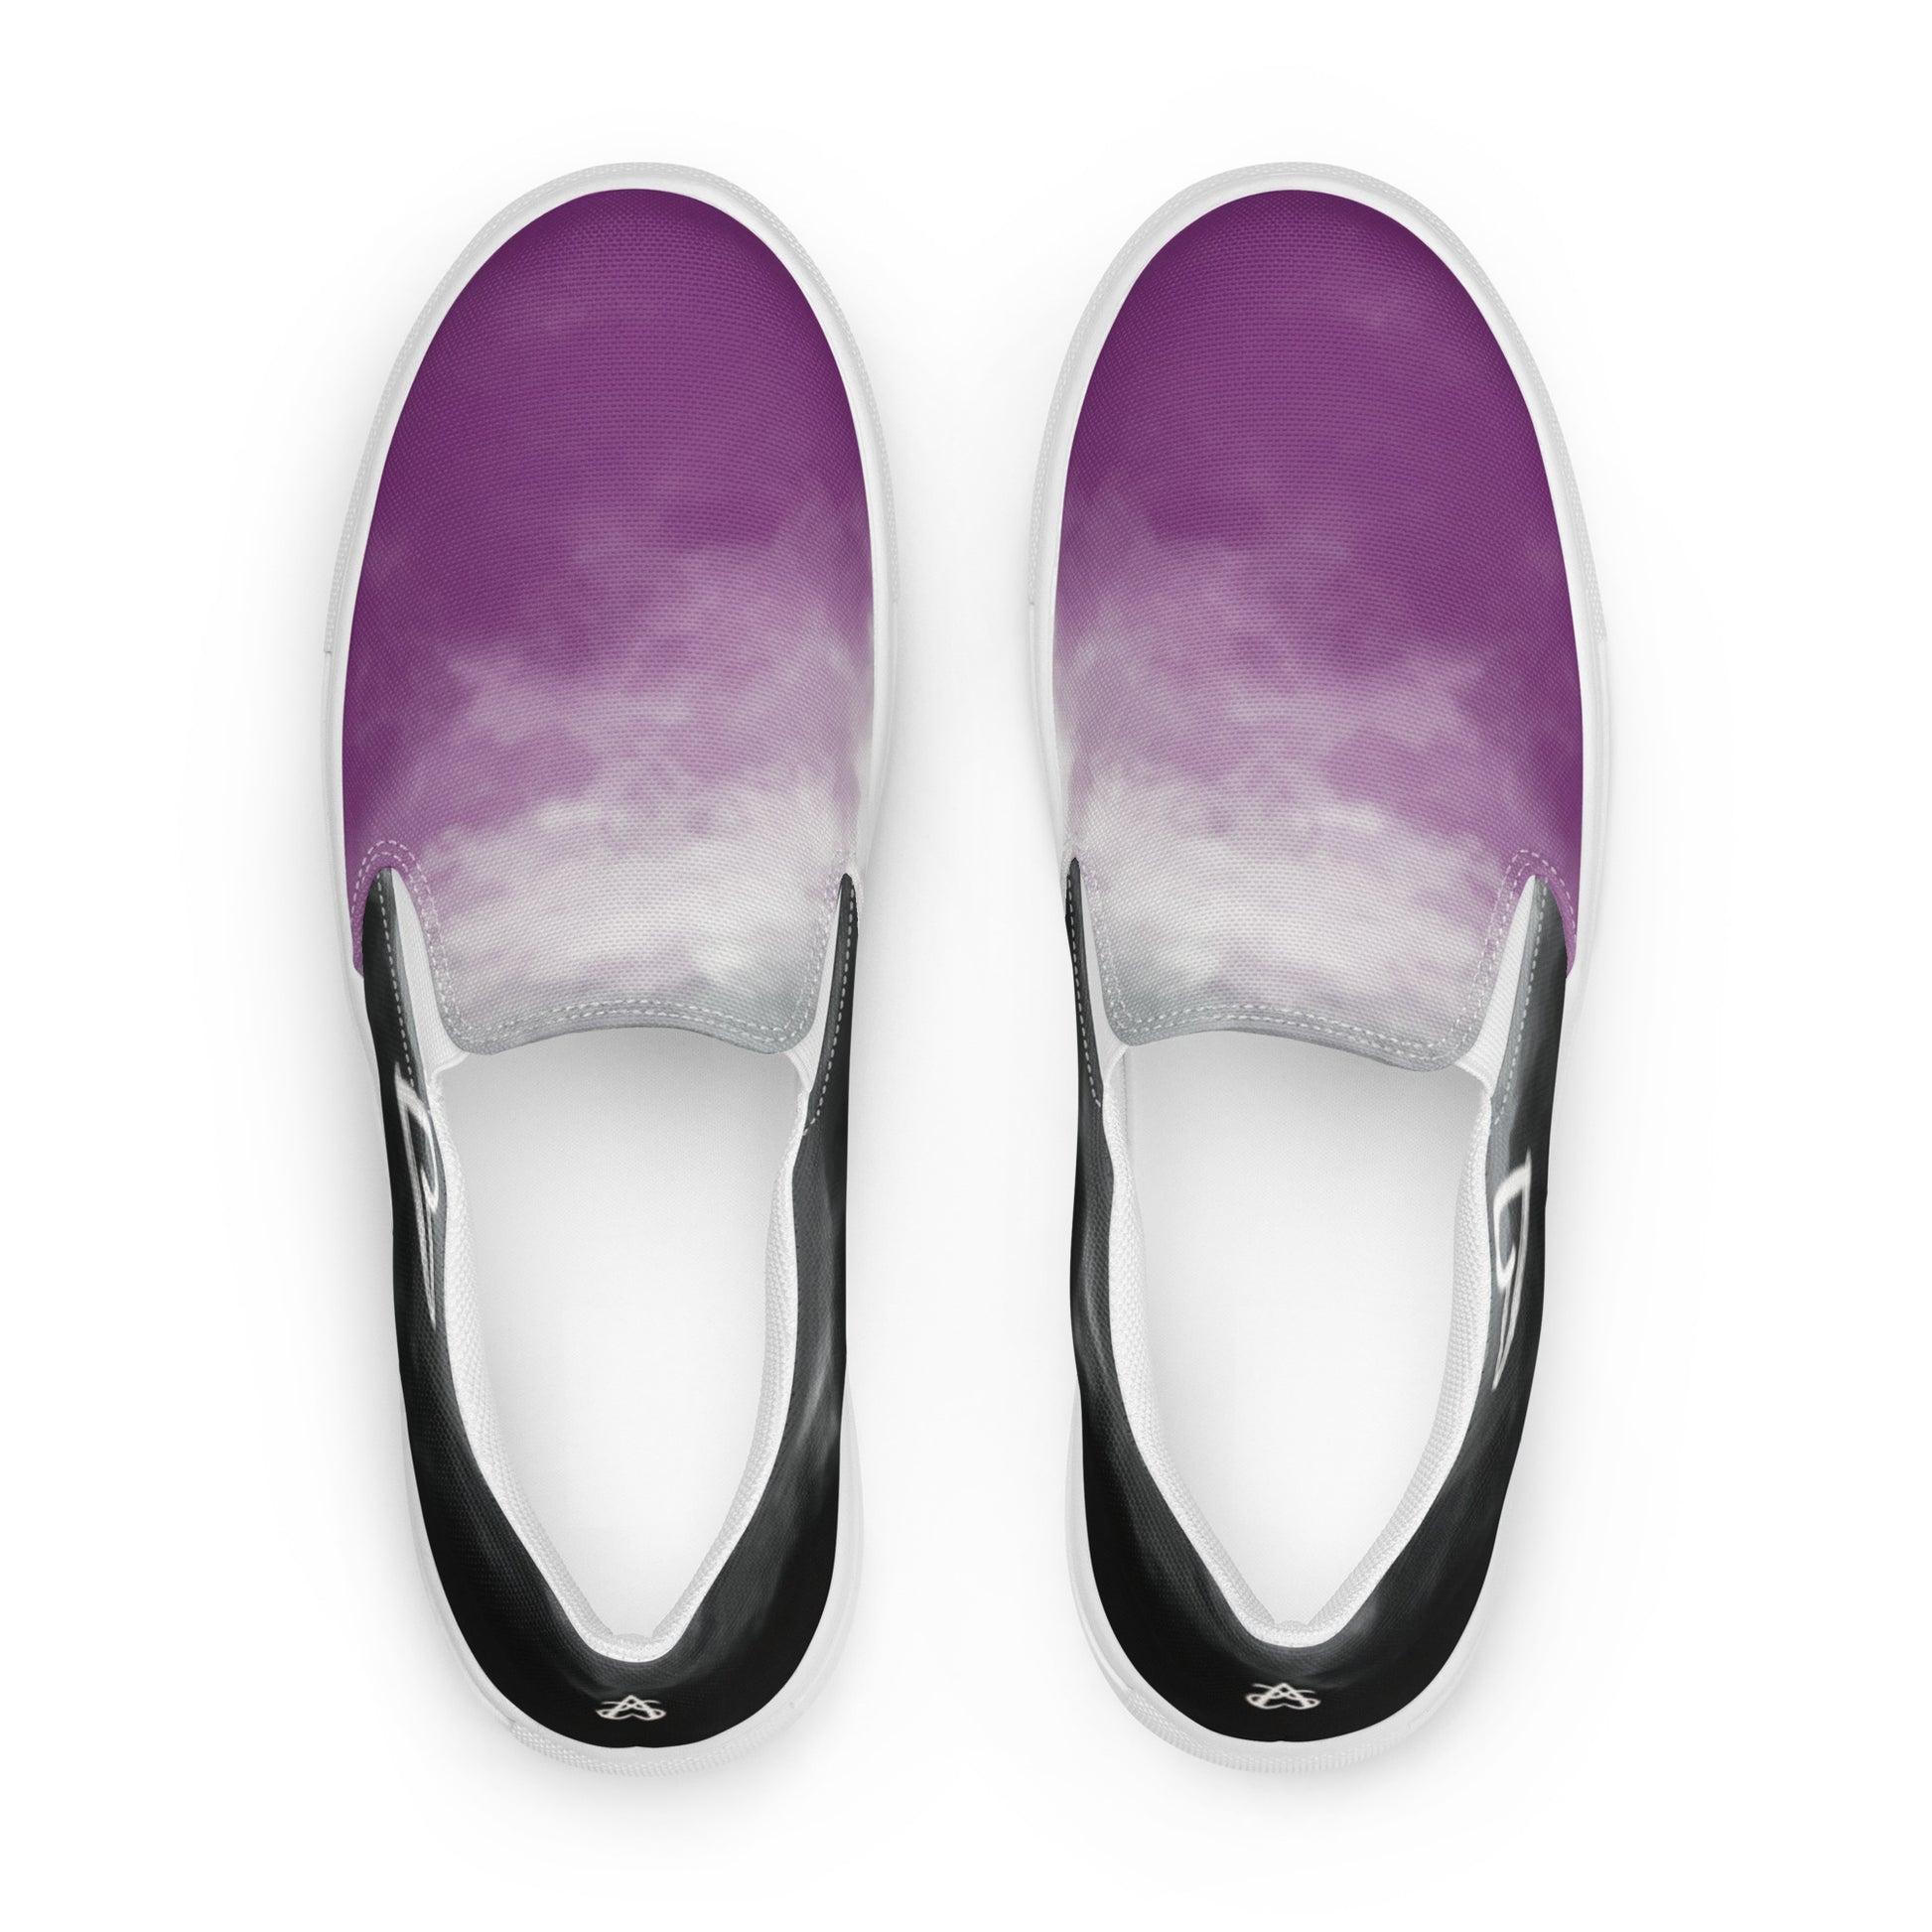 Top View: A pair of slip-on shoes with clouds in the asexual flag colors, a hand drawn white heart on the side, and the Aras Sivad Studio logo on the back.